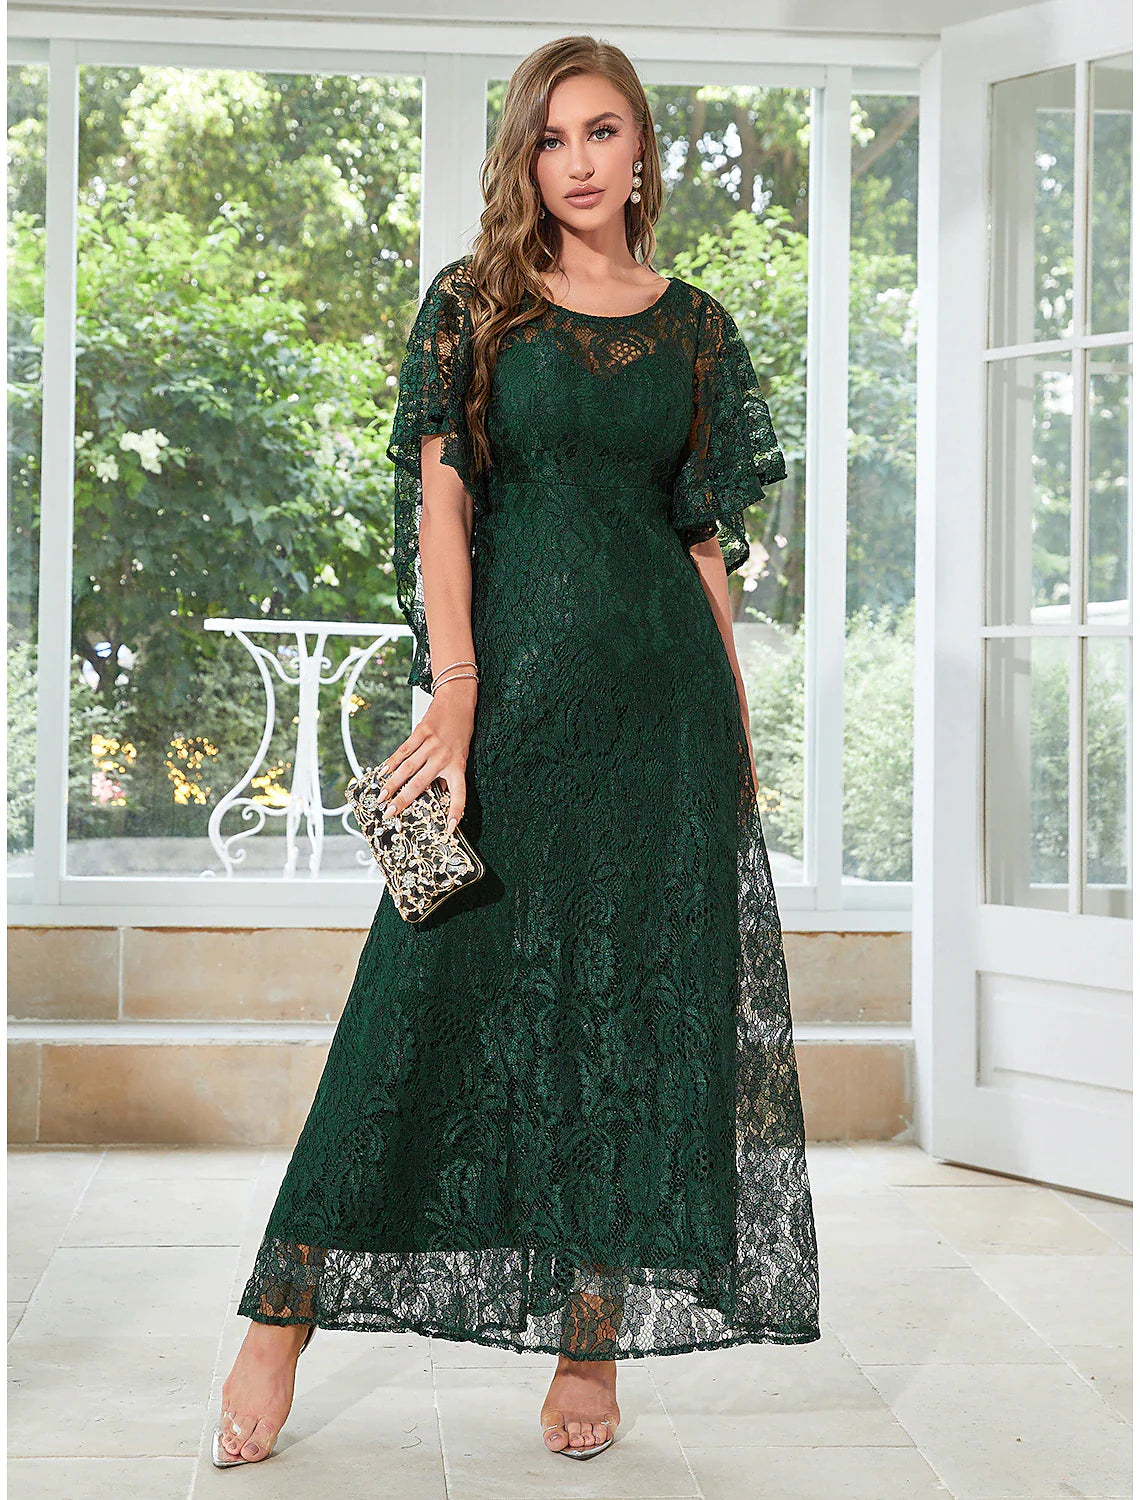 A-Line Wedding Guest Dresses Elegant Dress Party Wear Ankle Length Half Sleeve Jewel Neck Lace with Ruffles Appliques